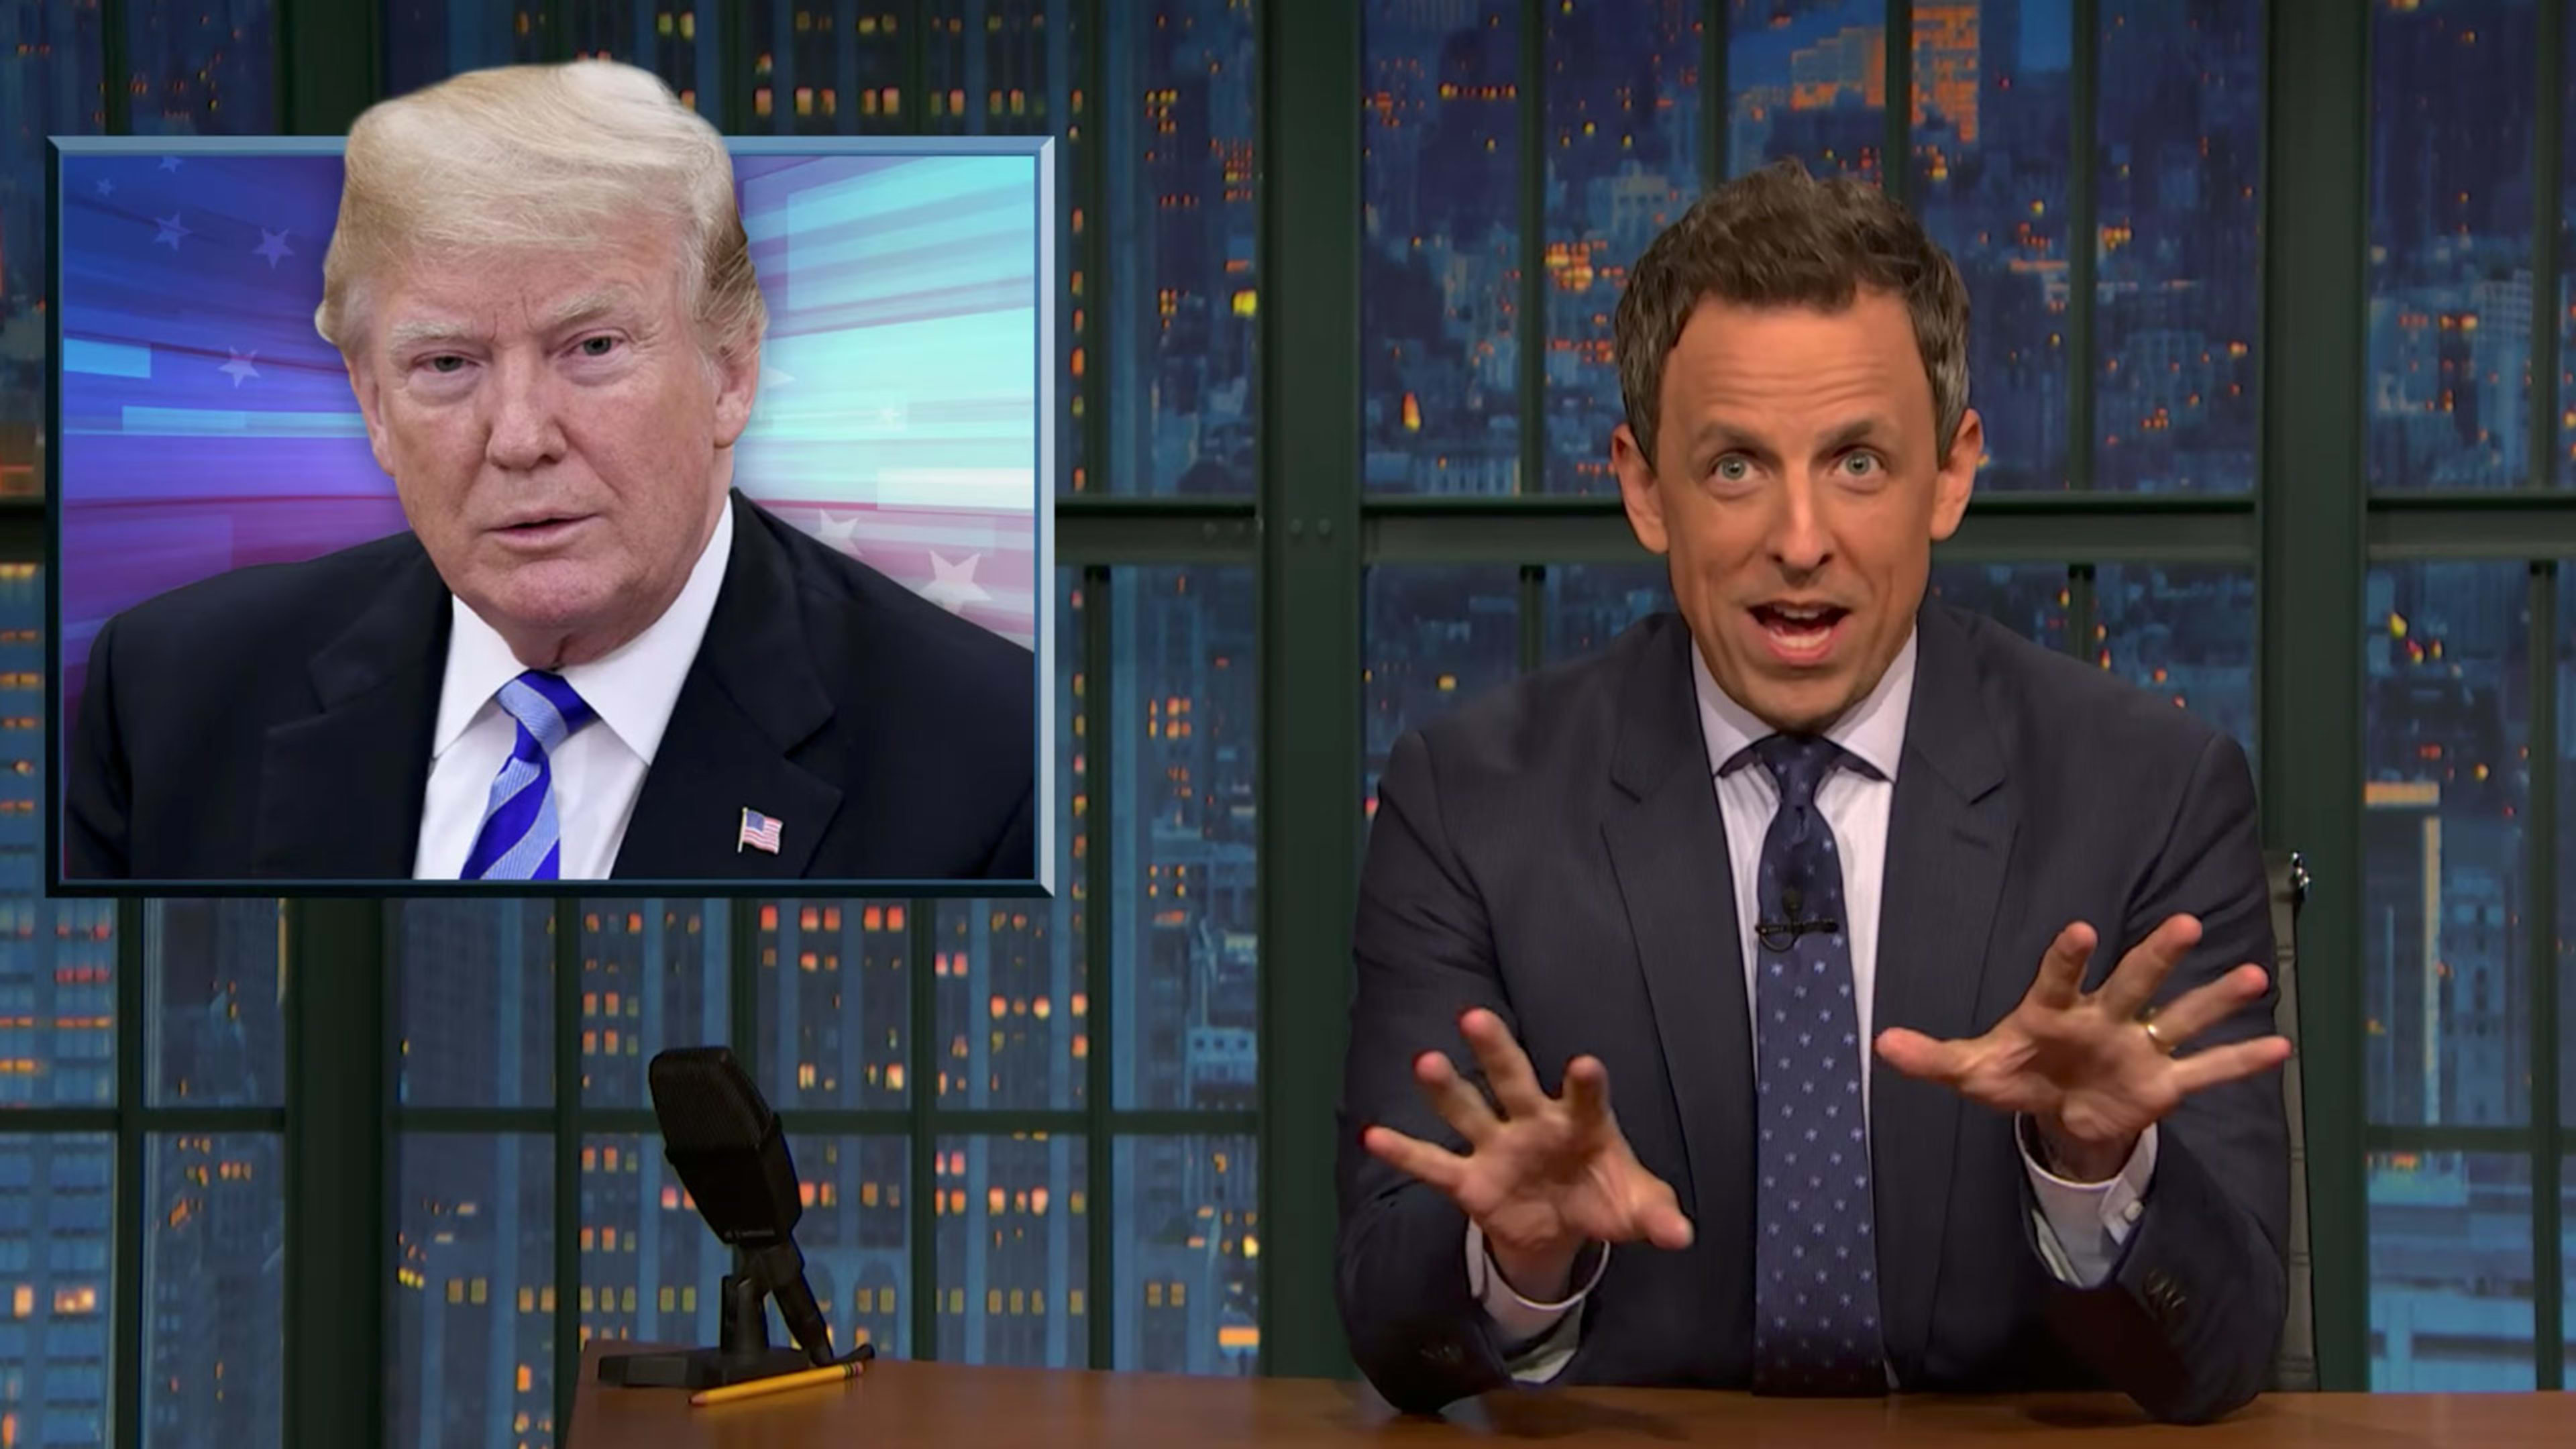 Seth Meyers shows why Twitter never should have given Trump 280